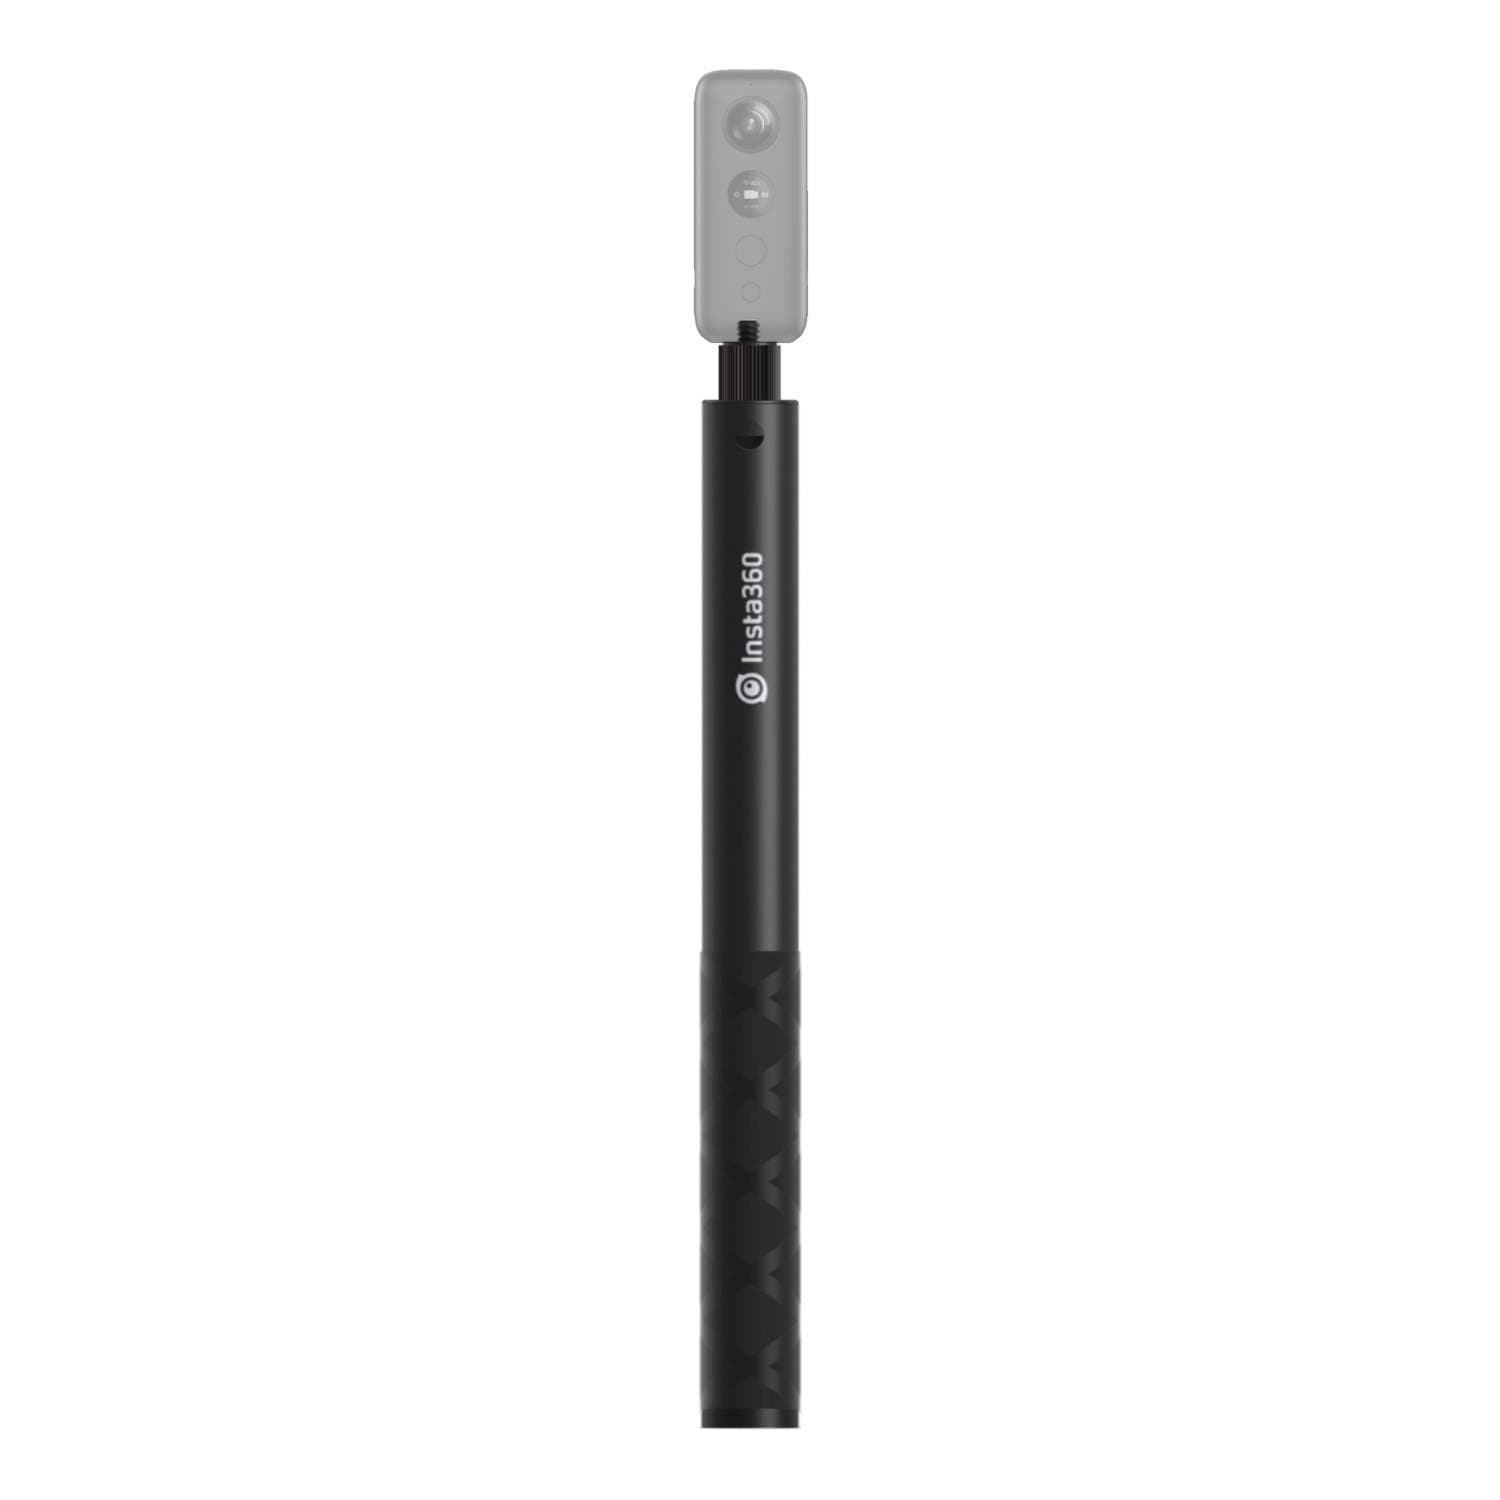 Insta360 Invisible Selfie Stick for ONE X2, X3, ONE R, RS (114cm)-New  Version